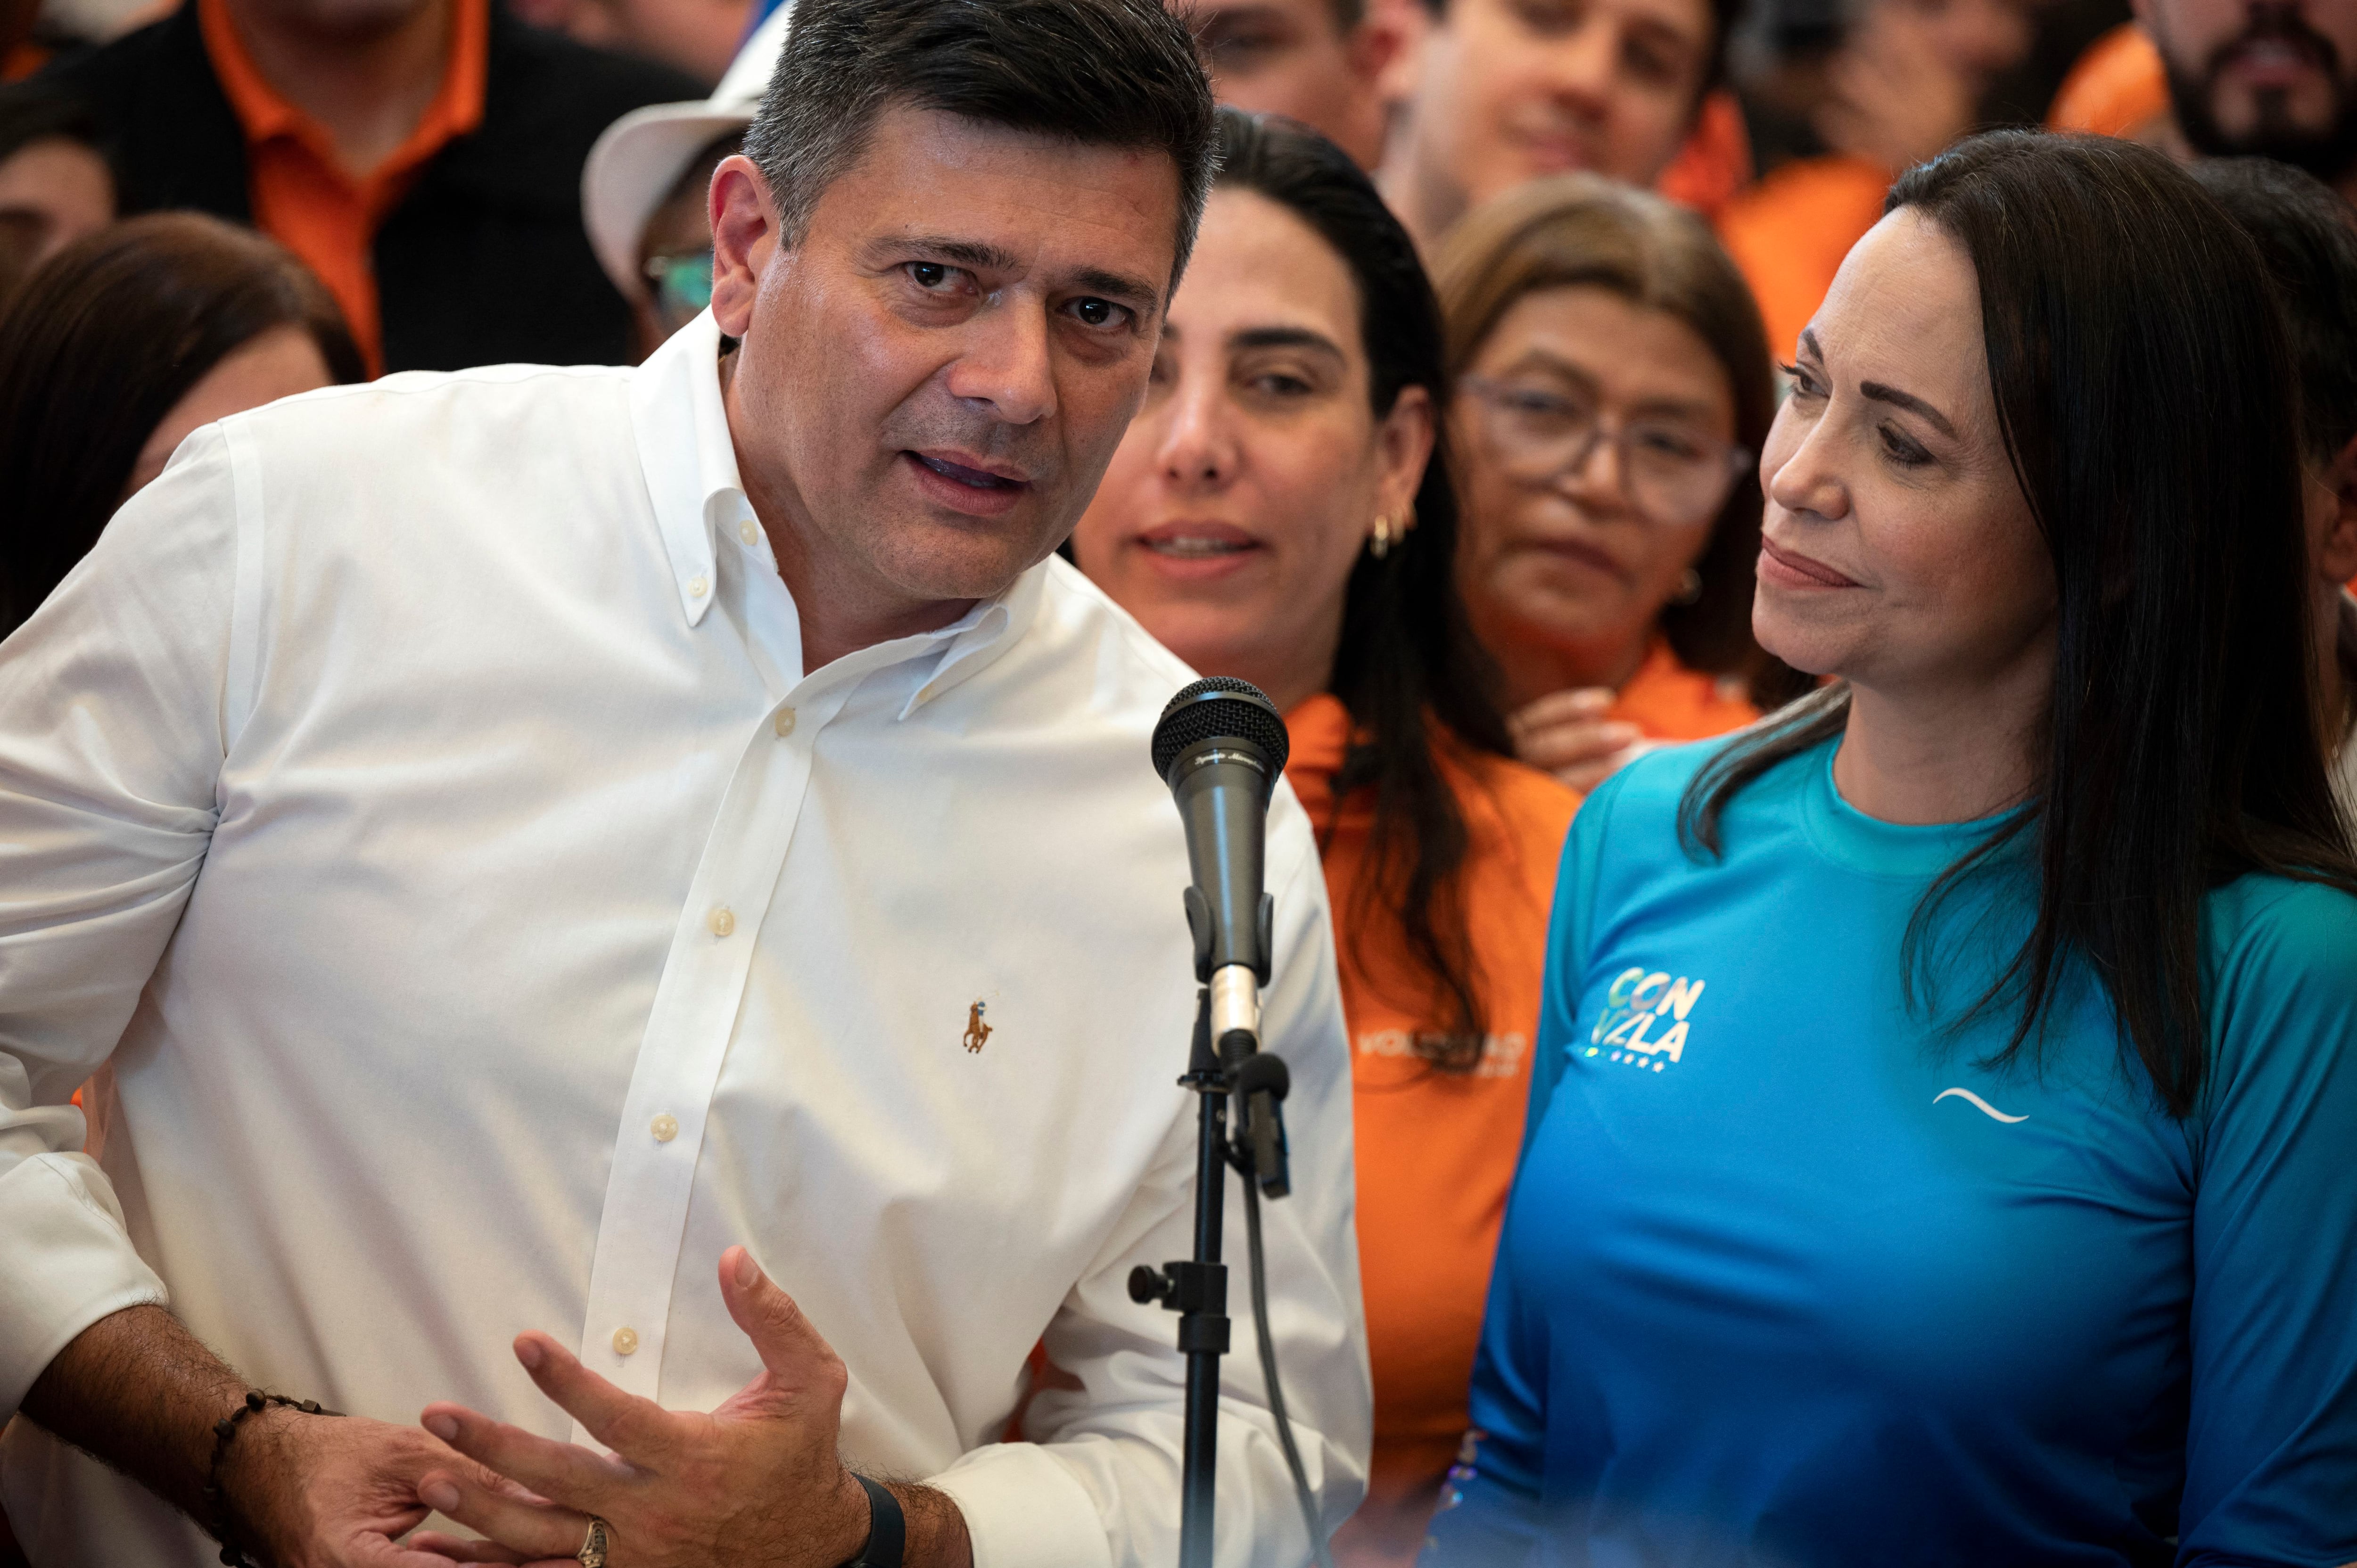 Former Venezuelan presidential candidate for the opposition party Voluntad Popular (VP), Freddy Superlano, shows his support for María Corina Machado.  (Photo by Federico PARRA/AFP).